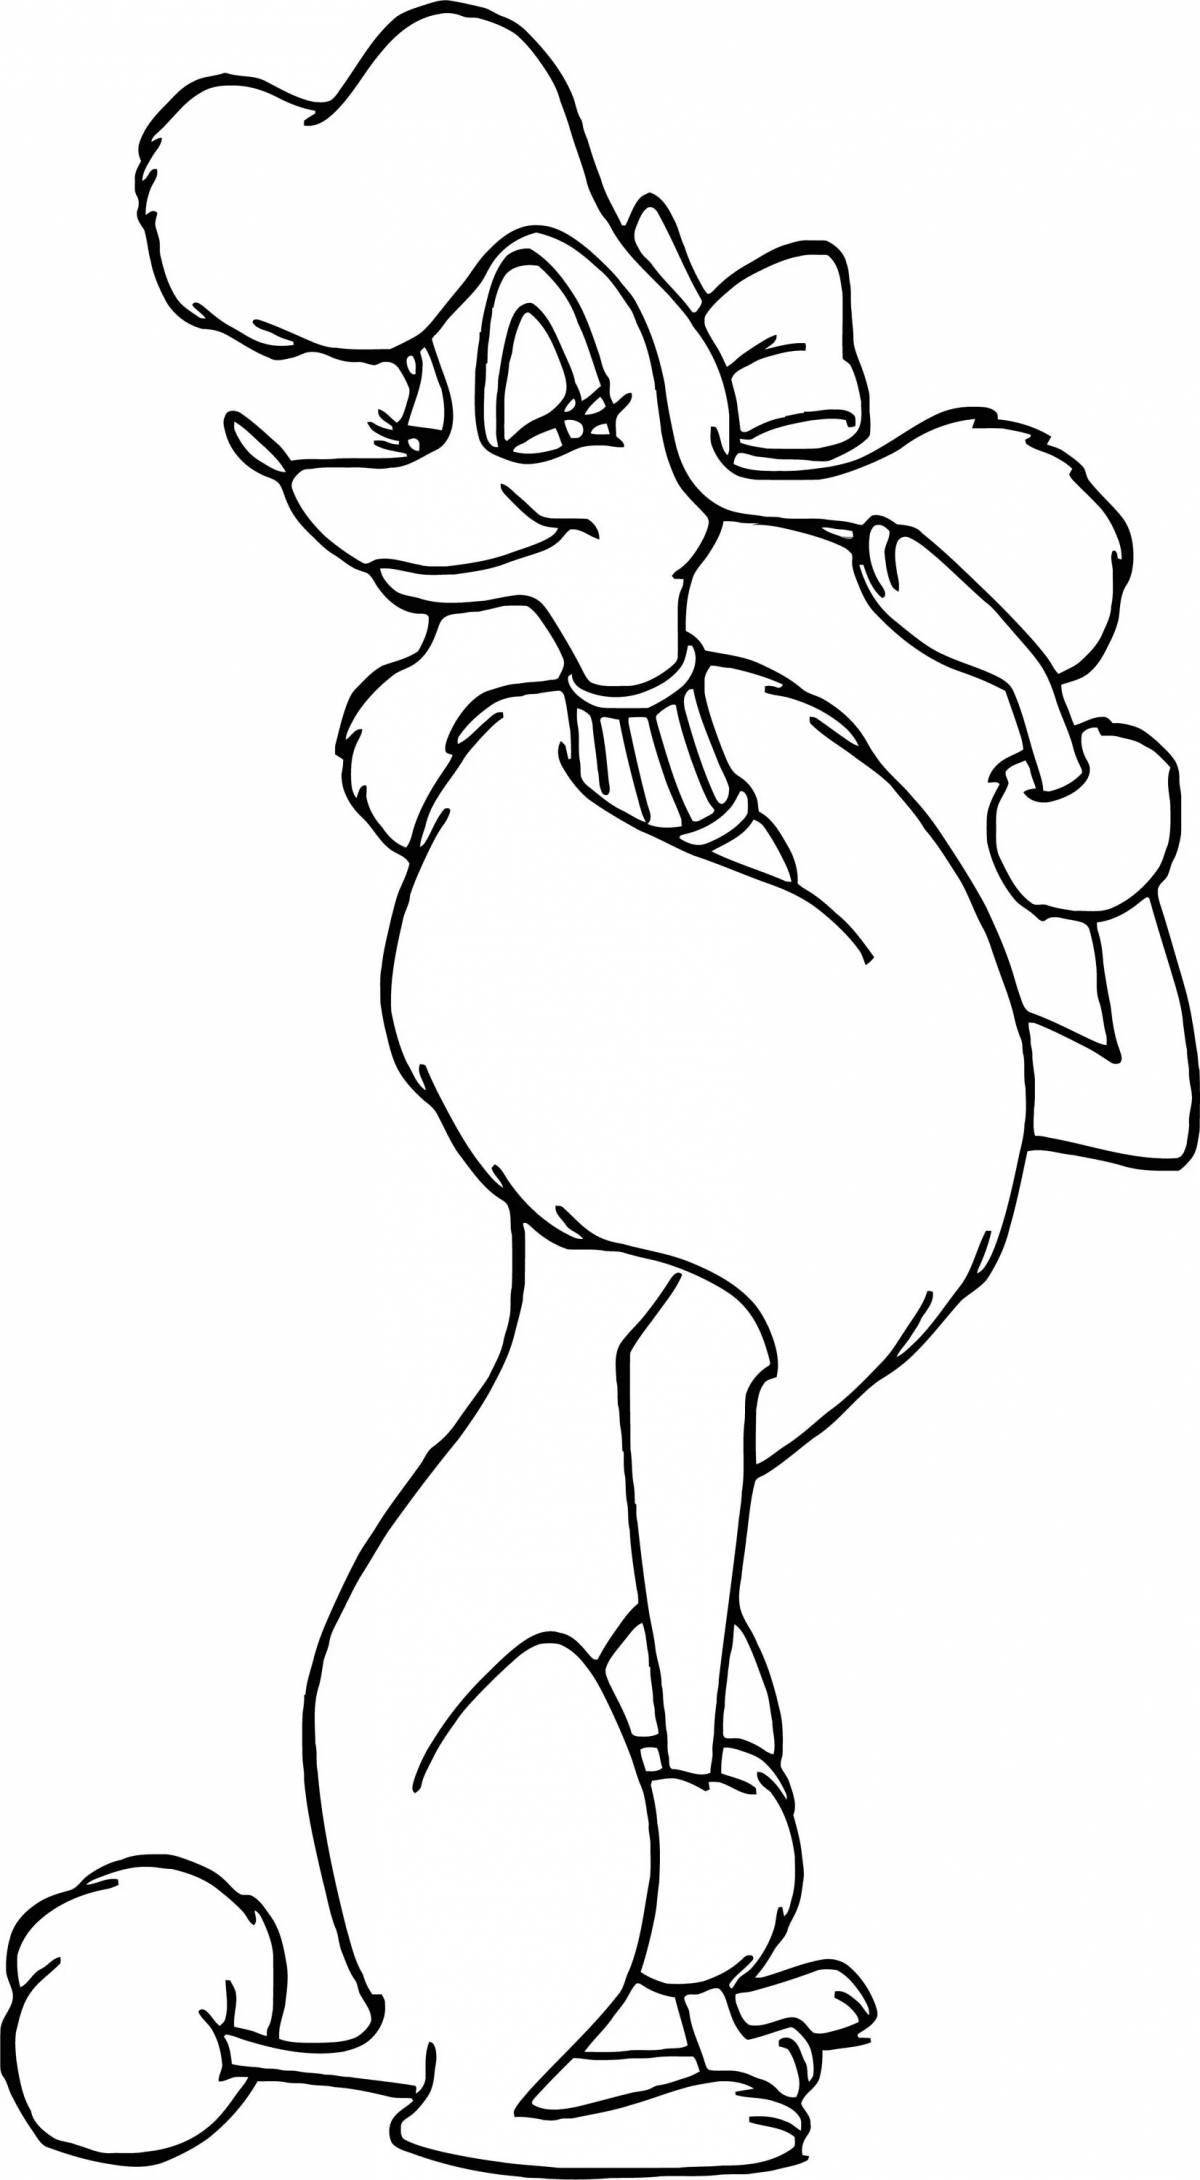 Coloring page joyful oliver and company